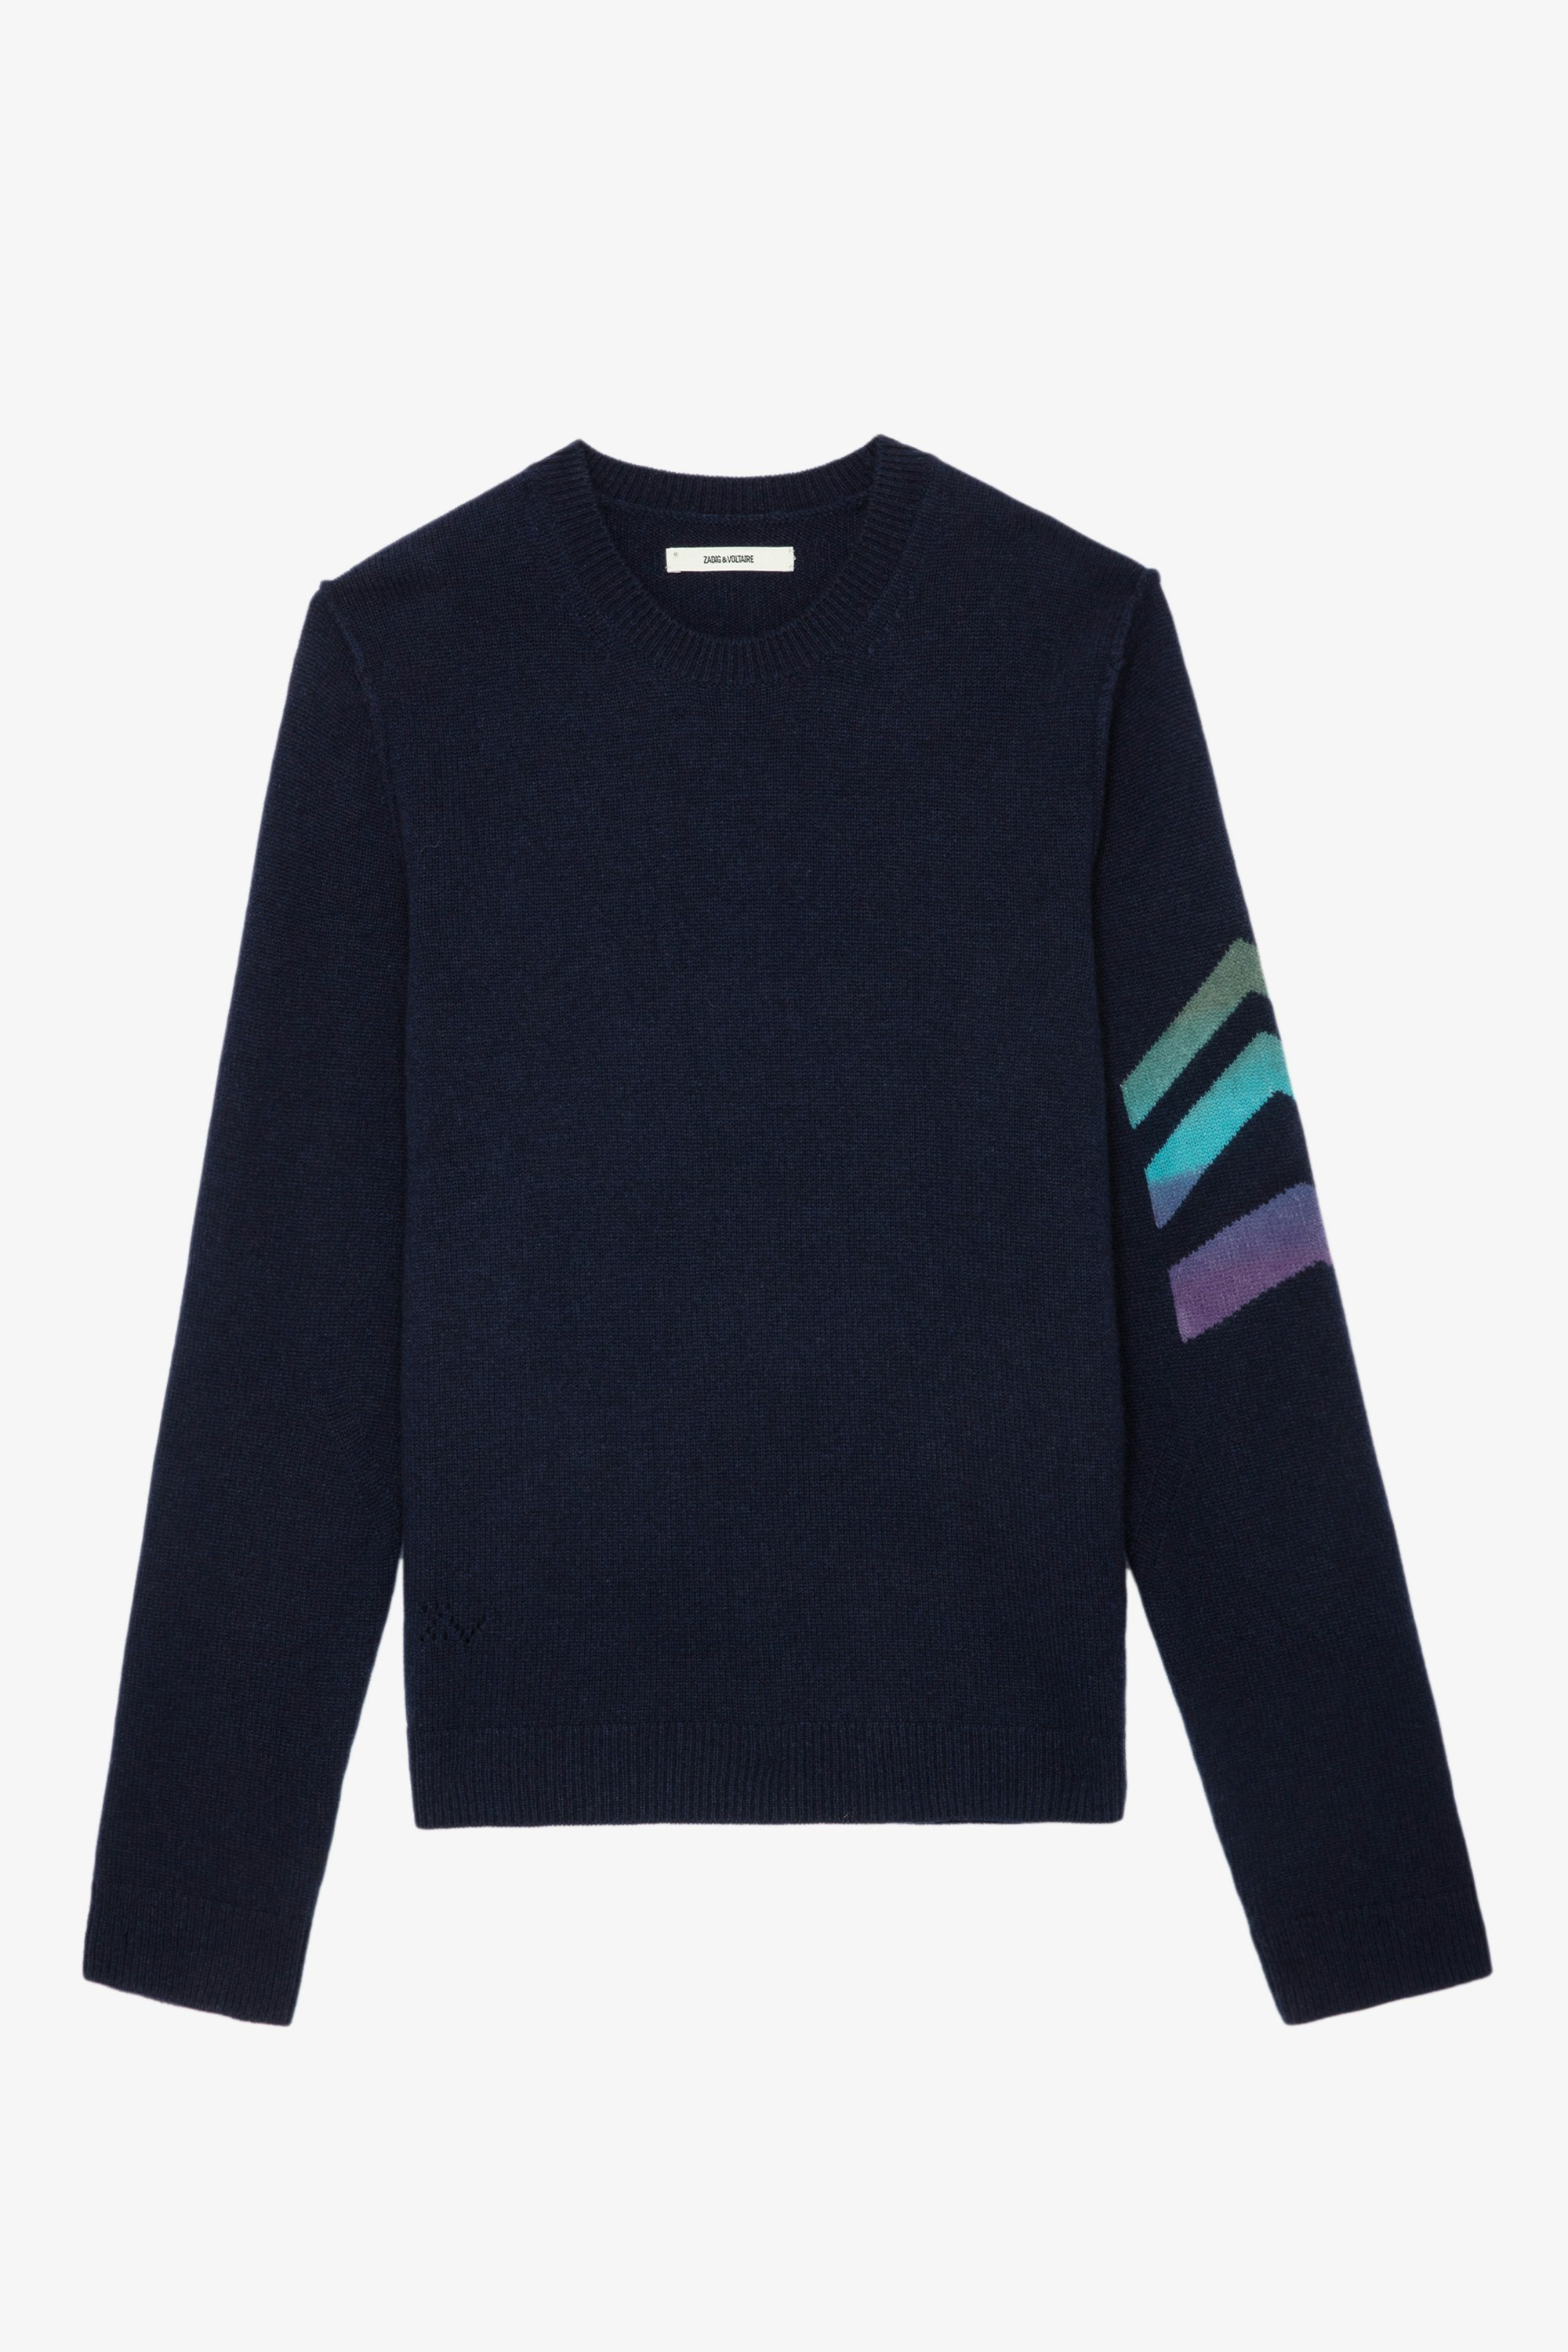 Kennedy Cashmere Jumper - Navy blue cashmere round-neck jumper with tie-dye arrows on the left sleeve.